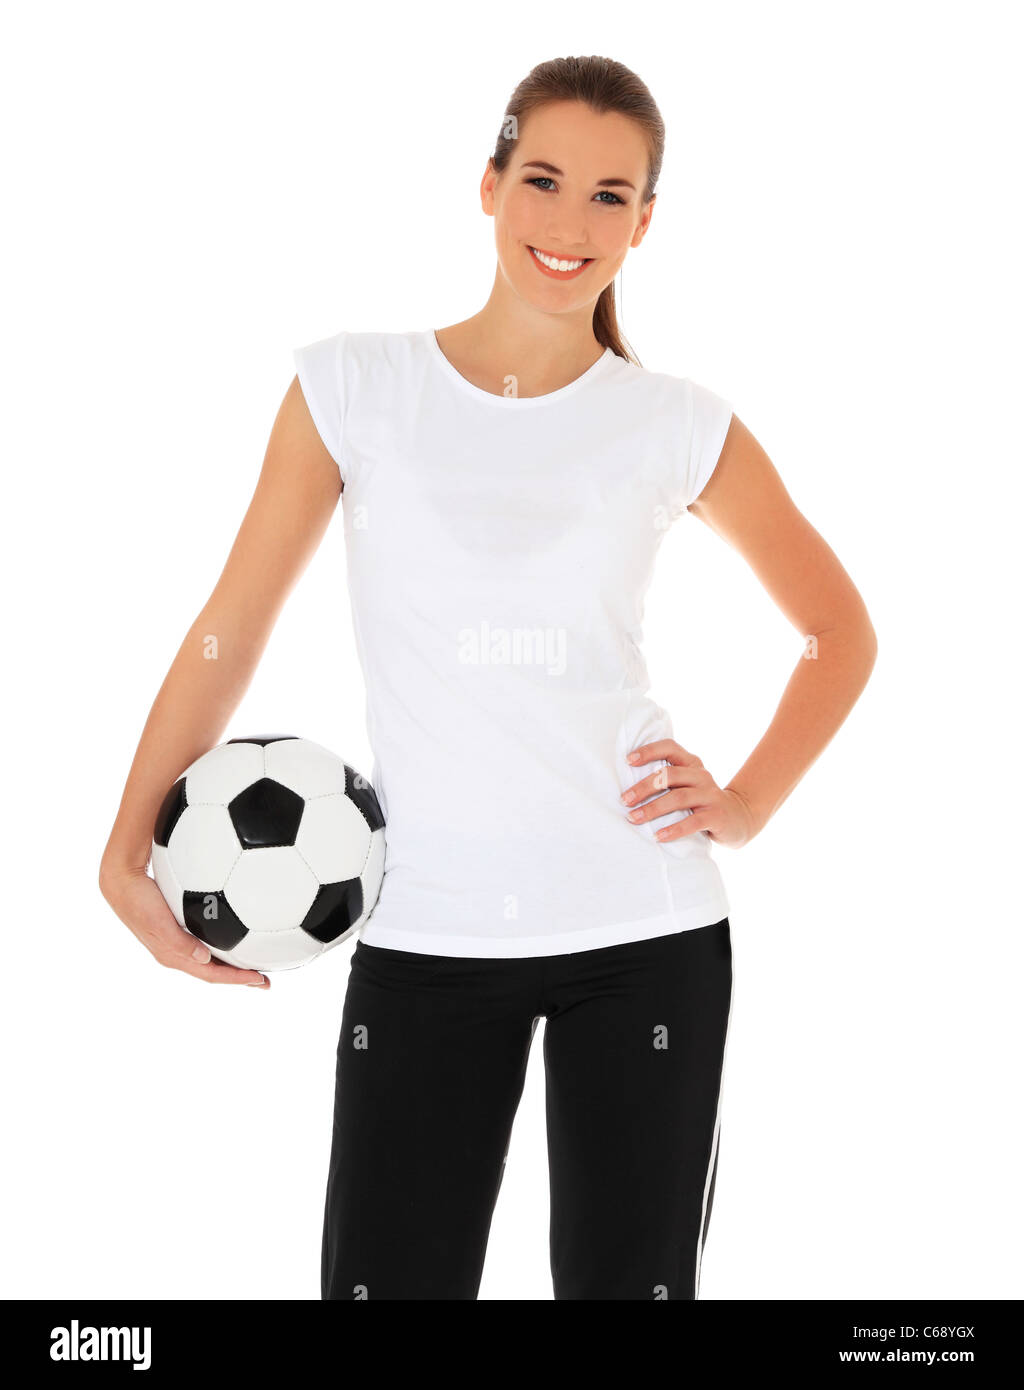 Attractive young woman in sports wear holding soccer ball. Le tout sur fond blanc. Banque D'Images